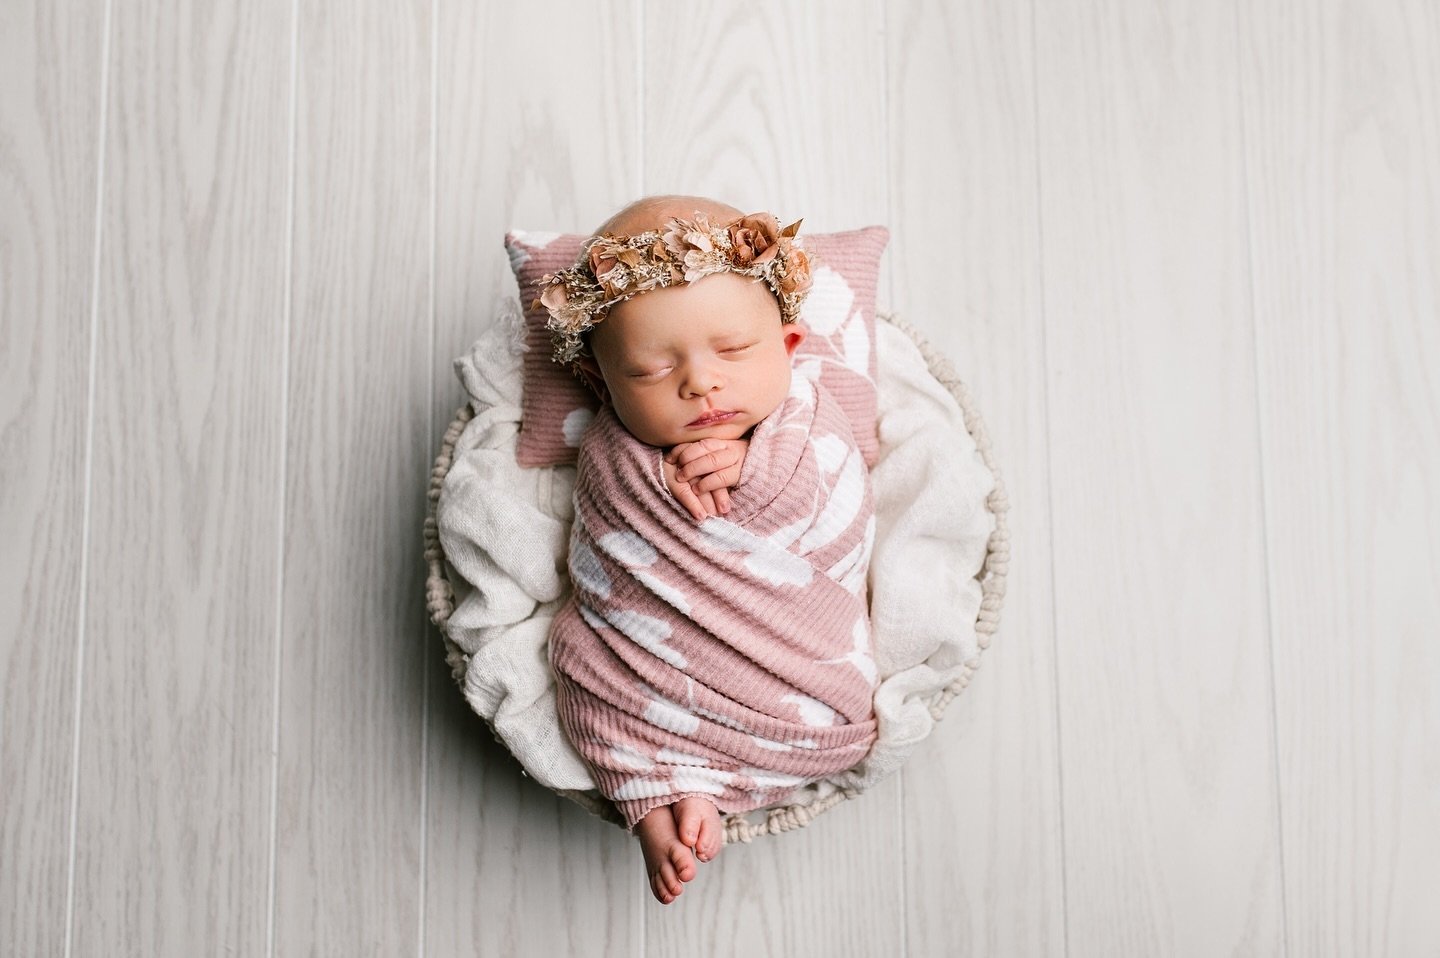 I love a simple floral wrap! So cute on this sweet baby girl!